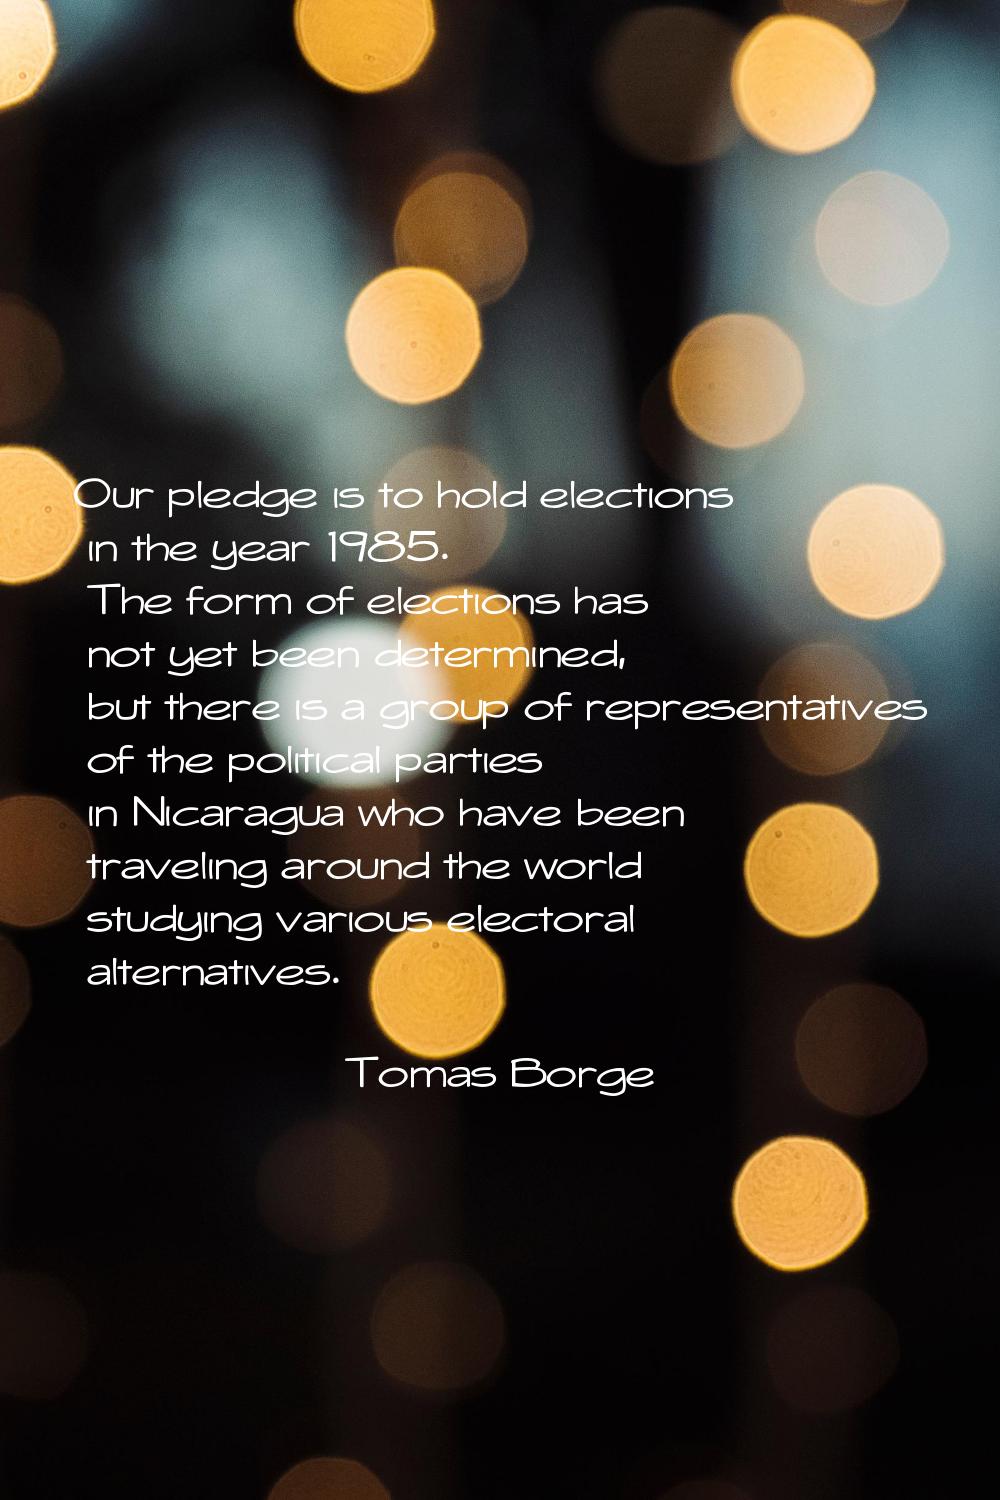 Our pledge is to hold elections in the year 1985. The form of elections has not yet been determined